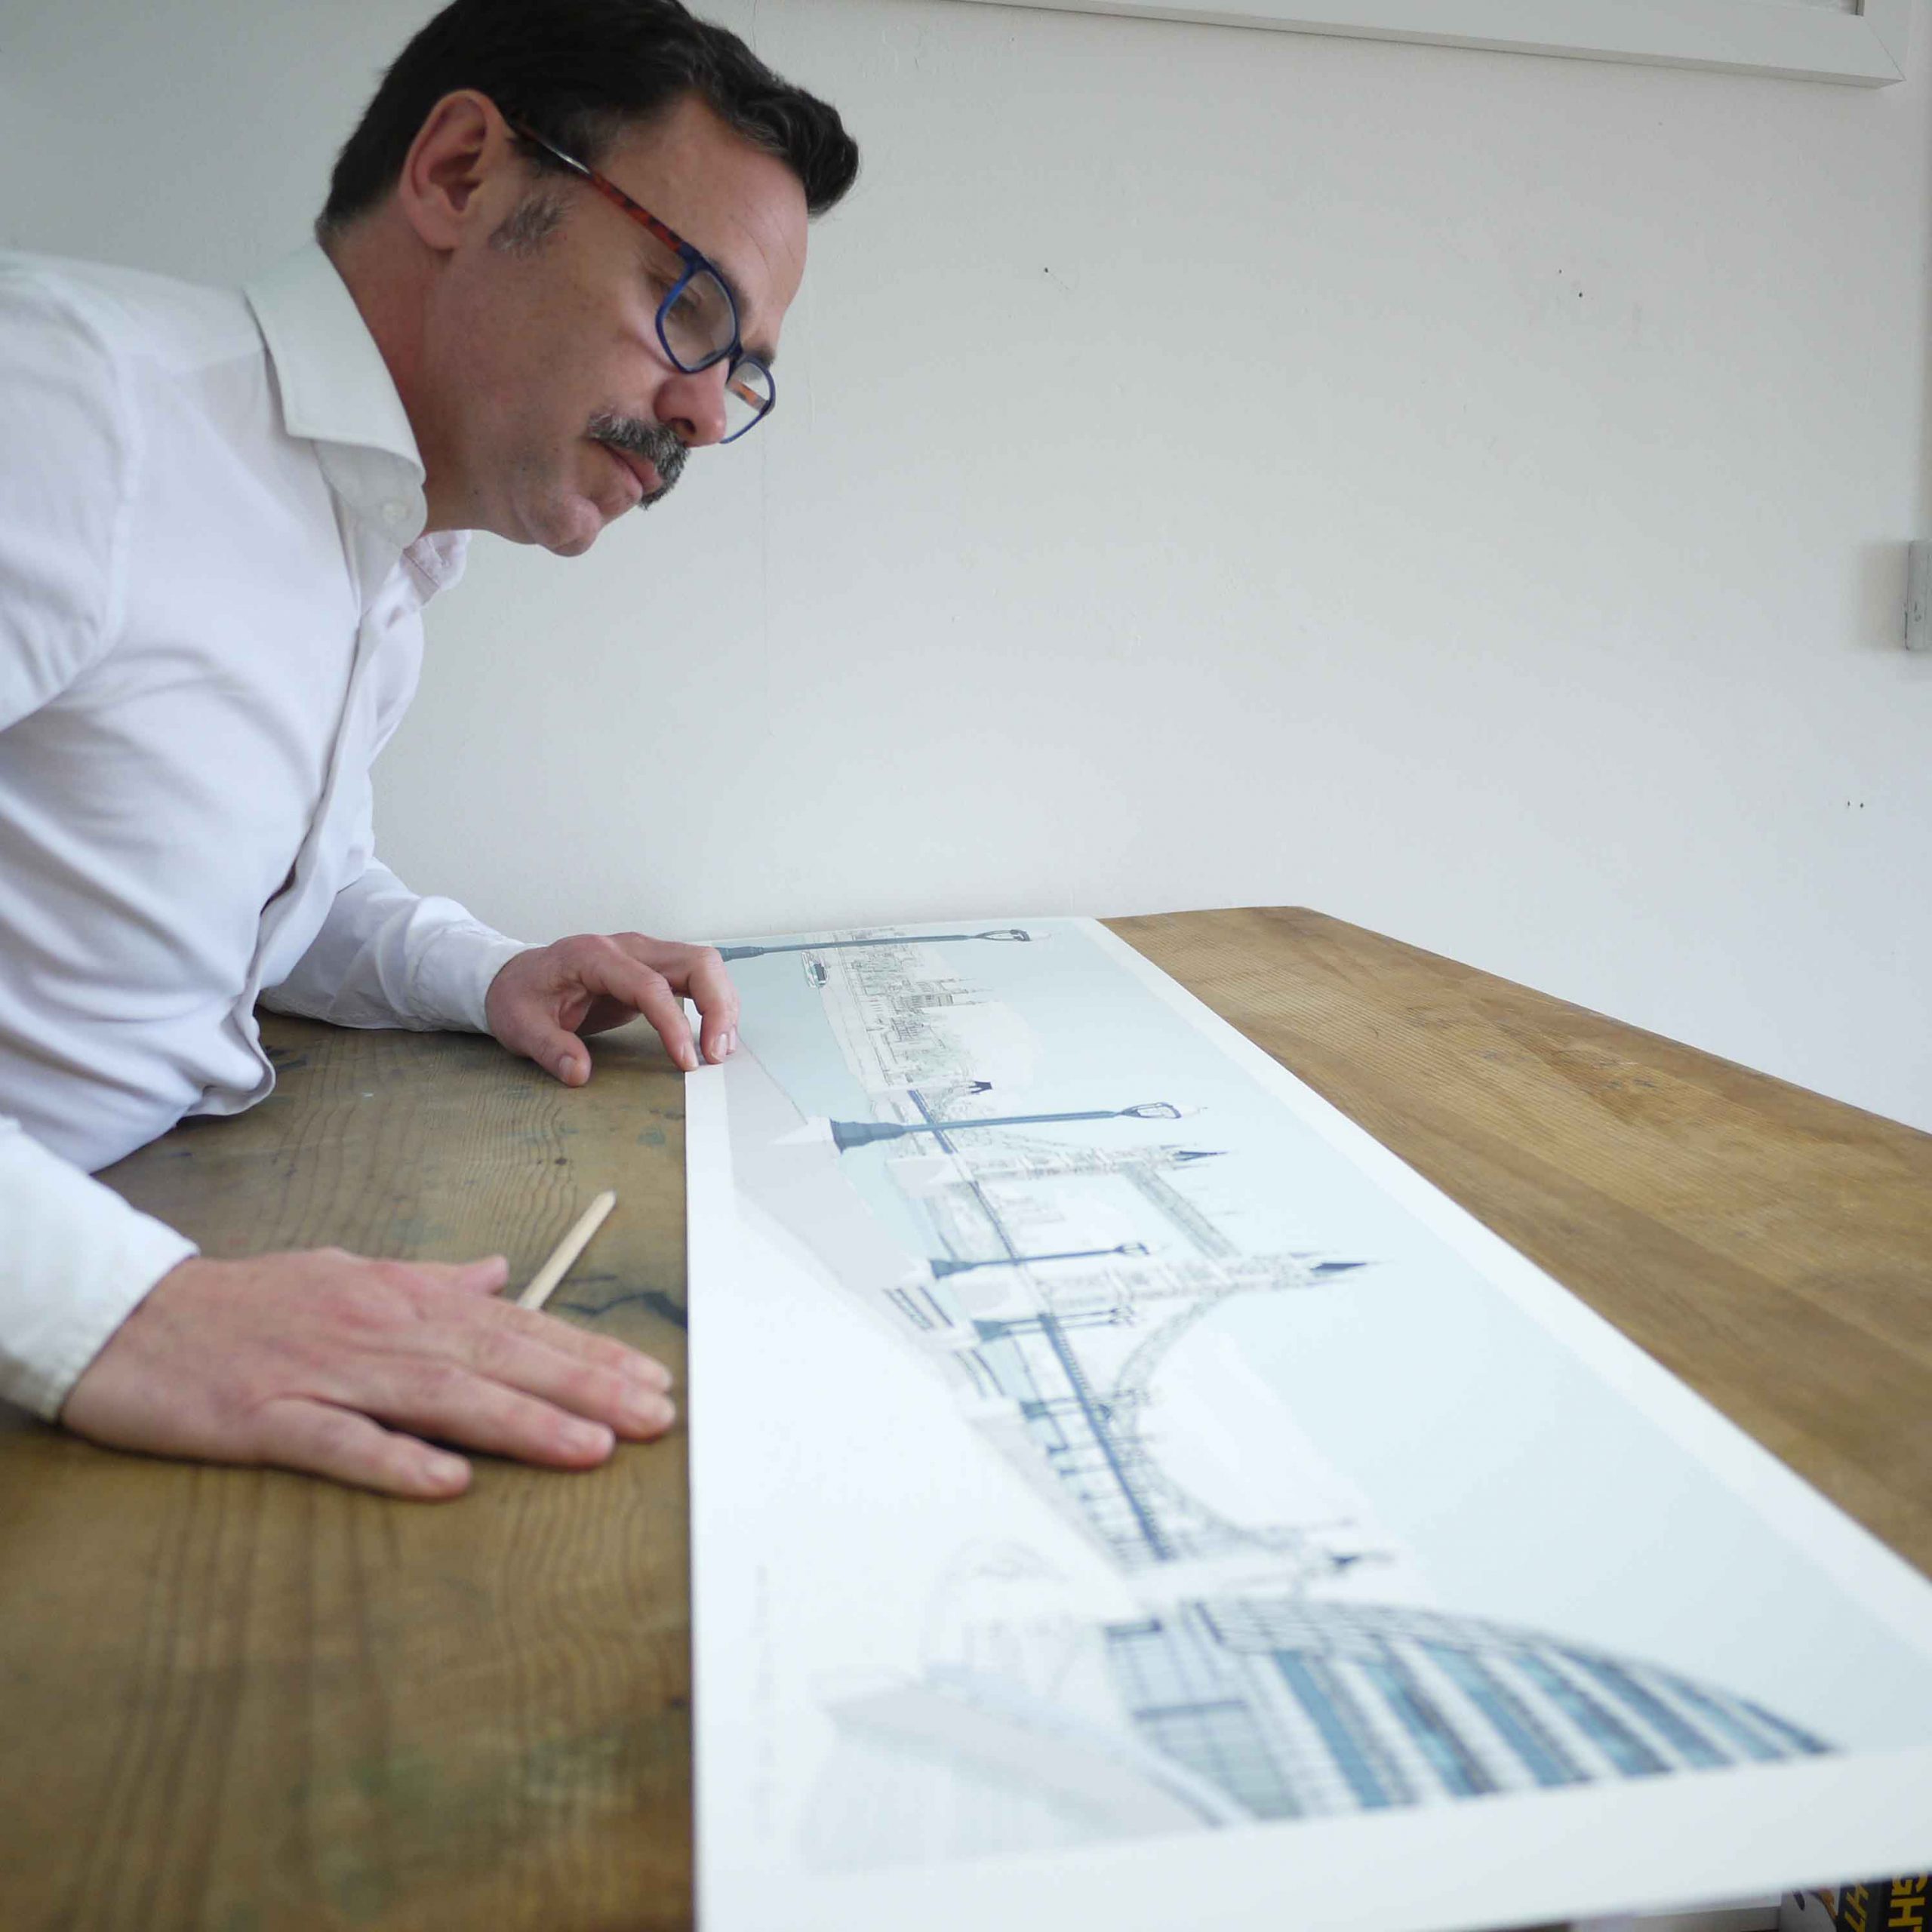 inspection of panoramic print named London River Thames by Tower Bridge Pebble Beach by artist alej ez